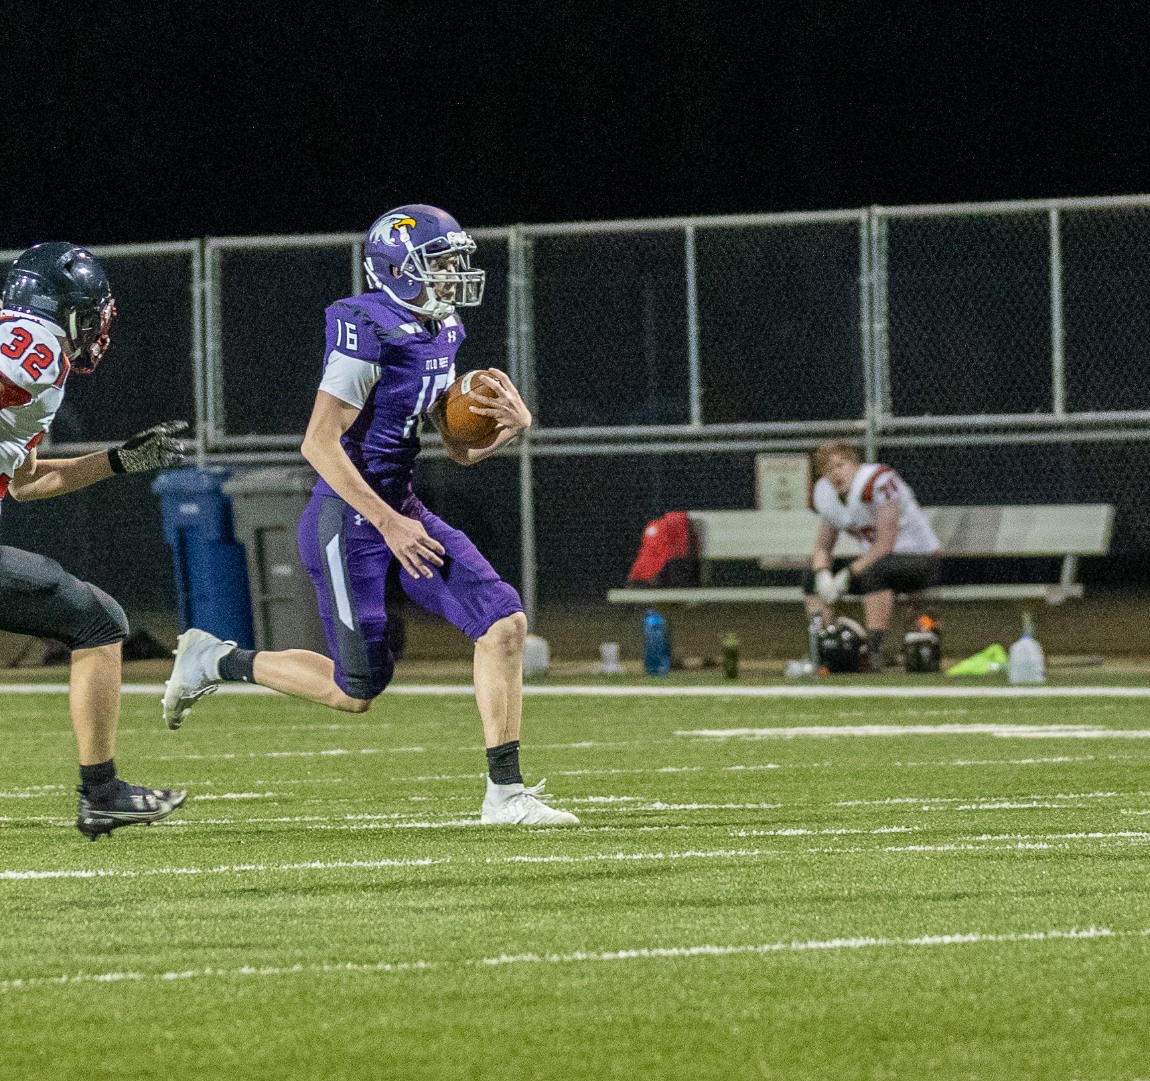 Eau-Claire-Memorial-JV-Football-LaCrosse-Central-at-Home-3-29-21-1830